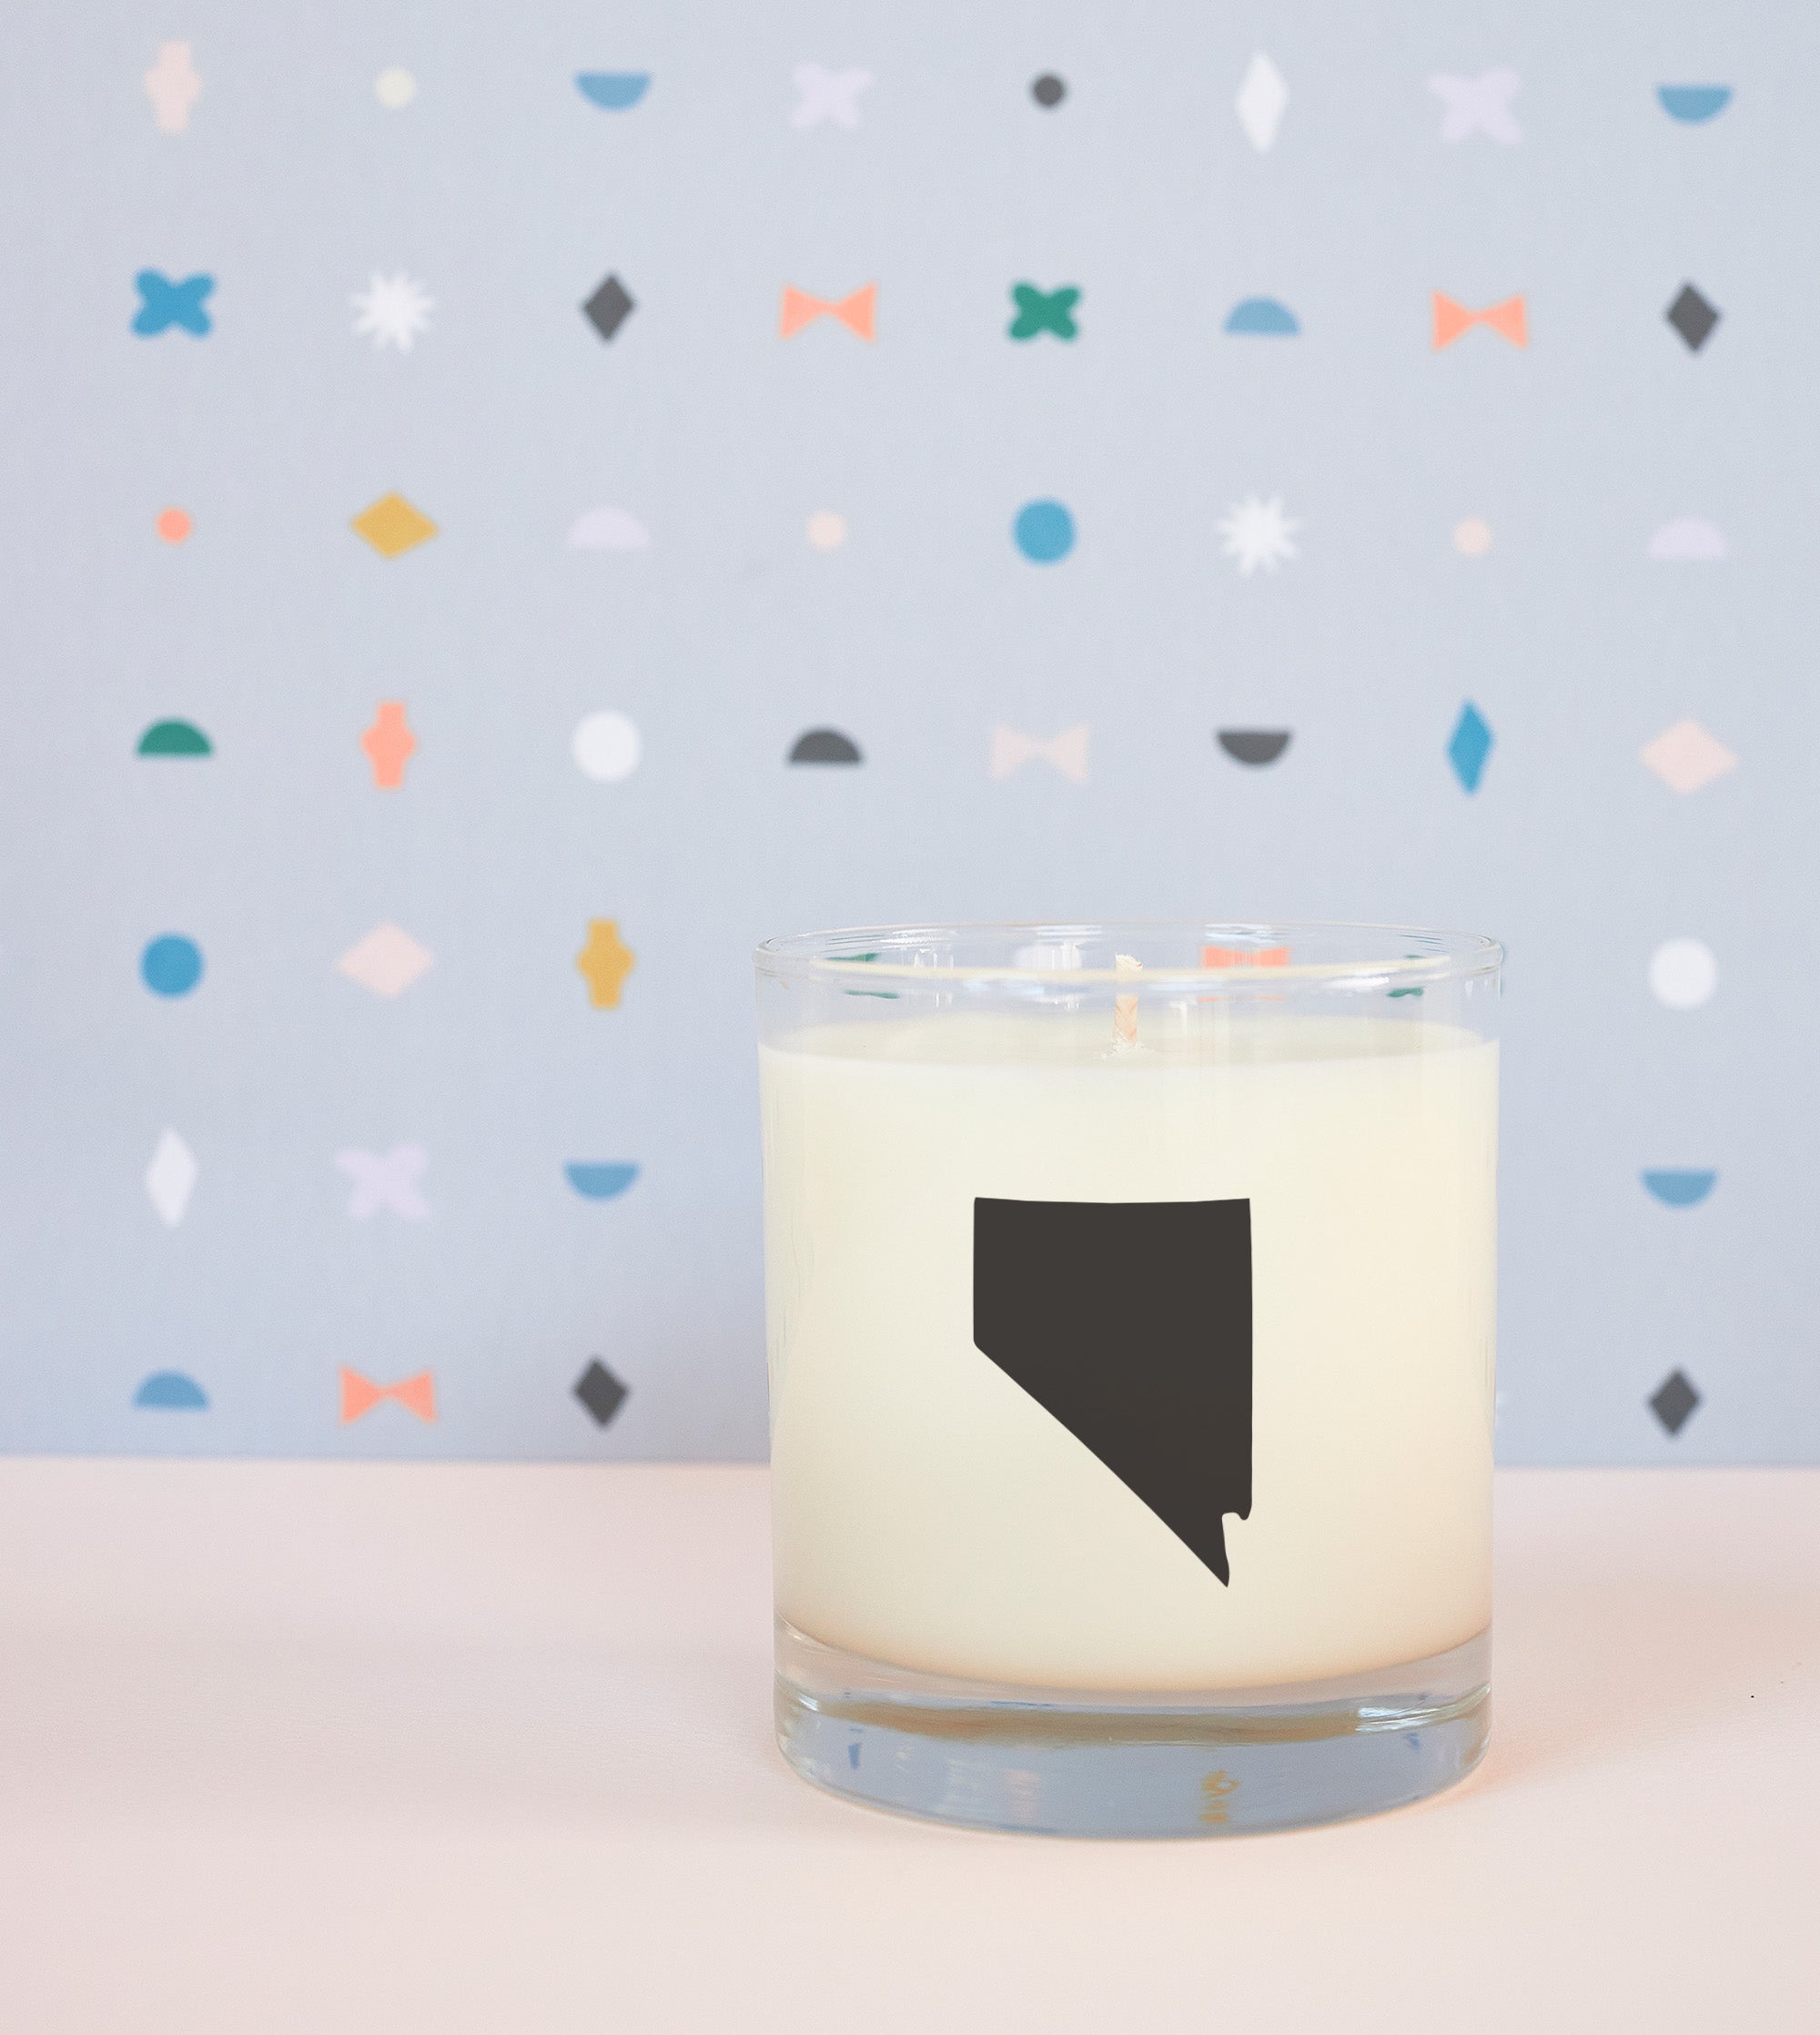 Nevada State Soy Candle